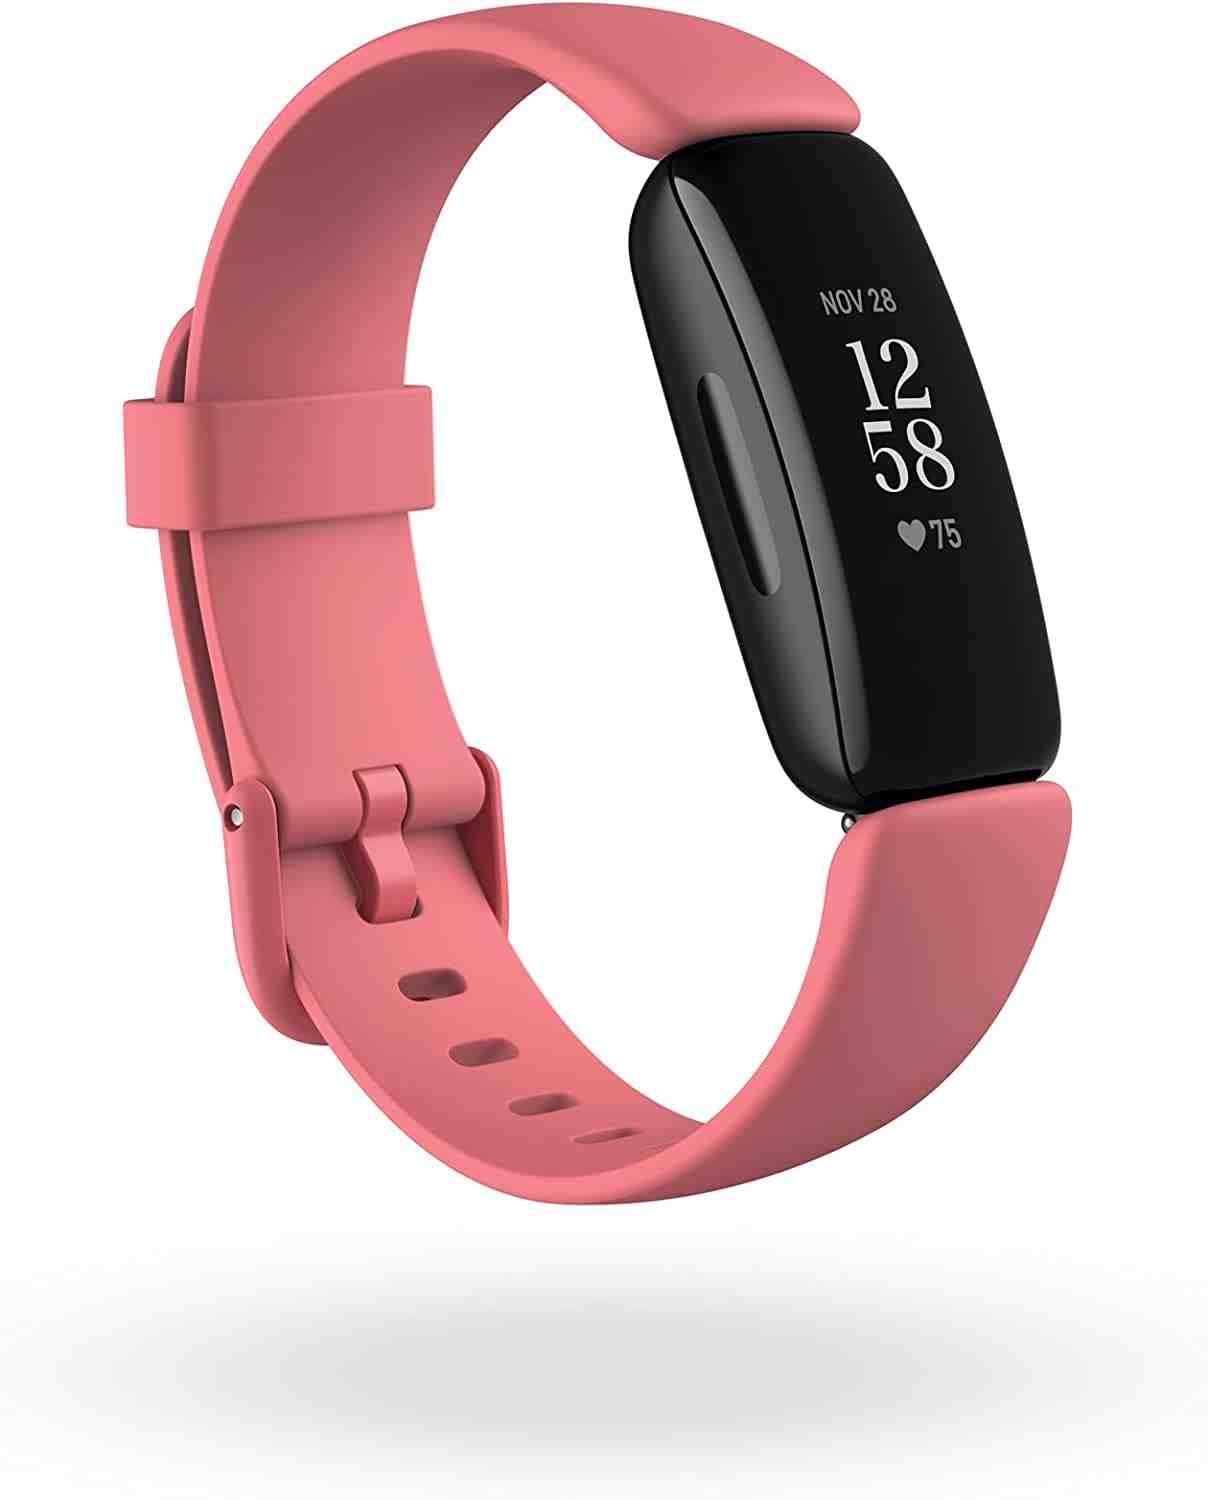 Can you text on a Fitbit?